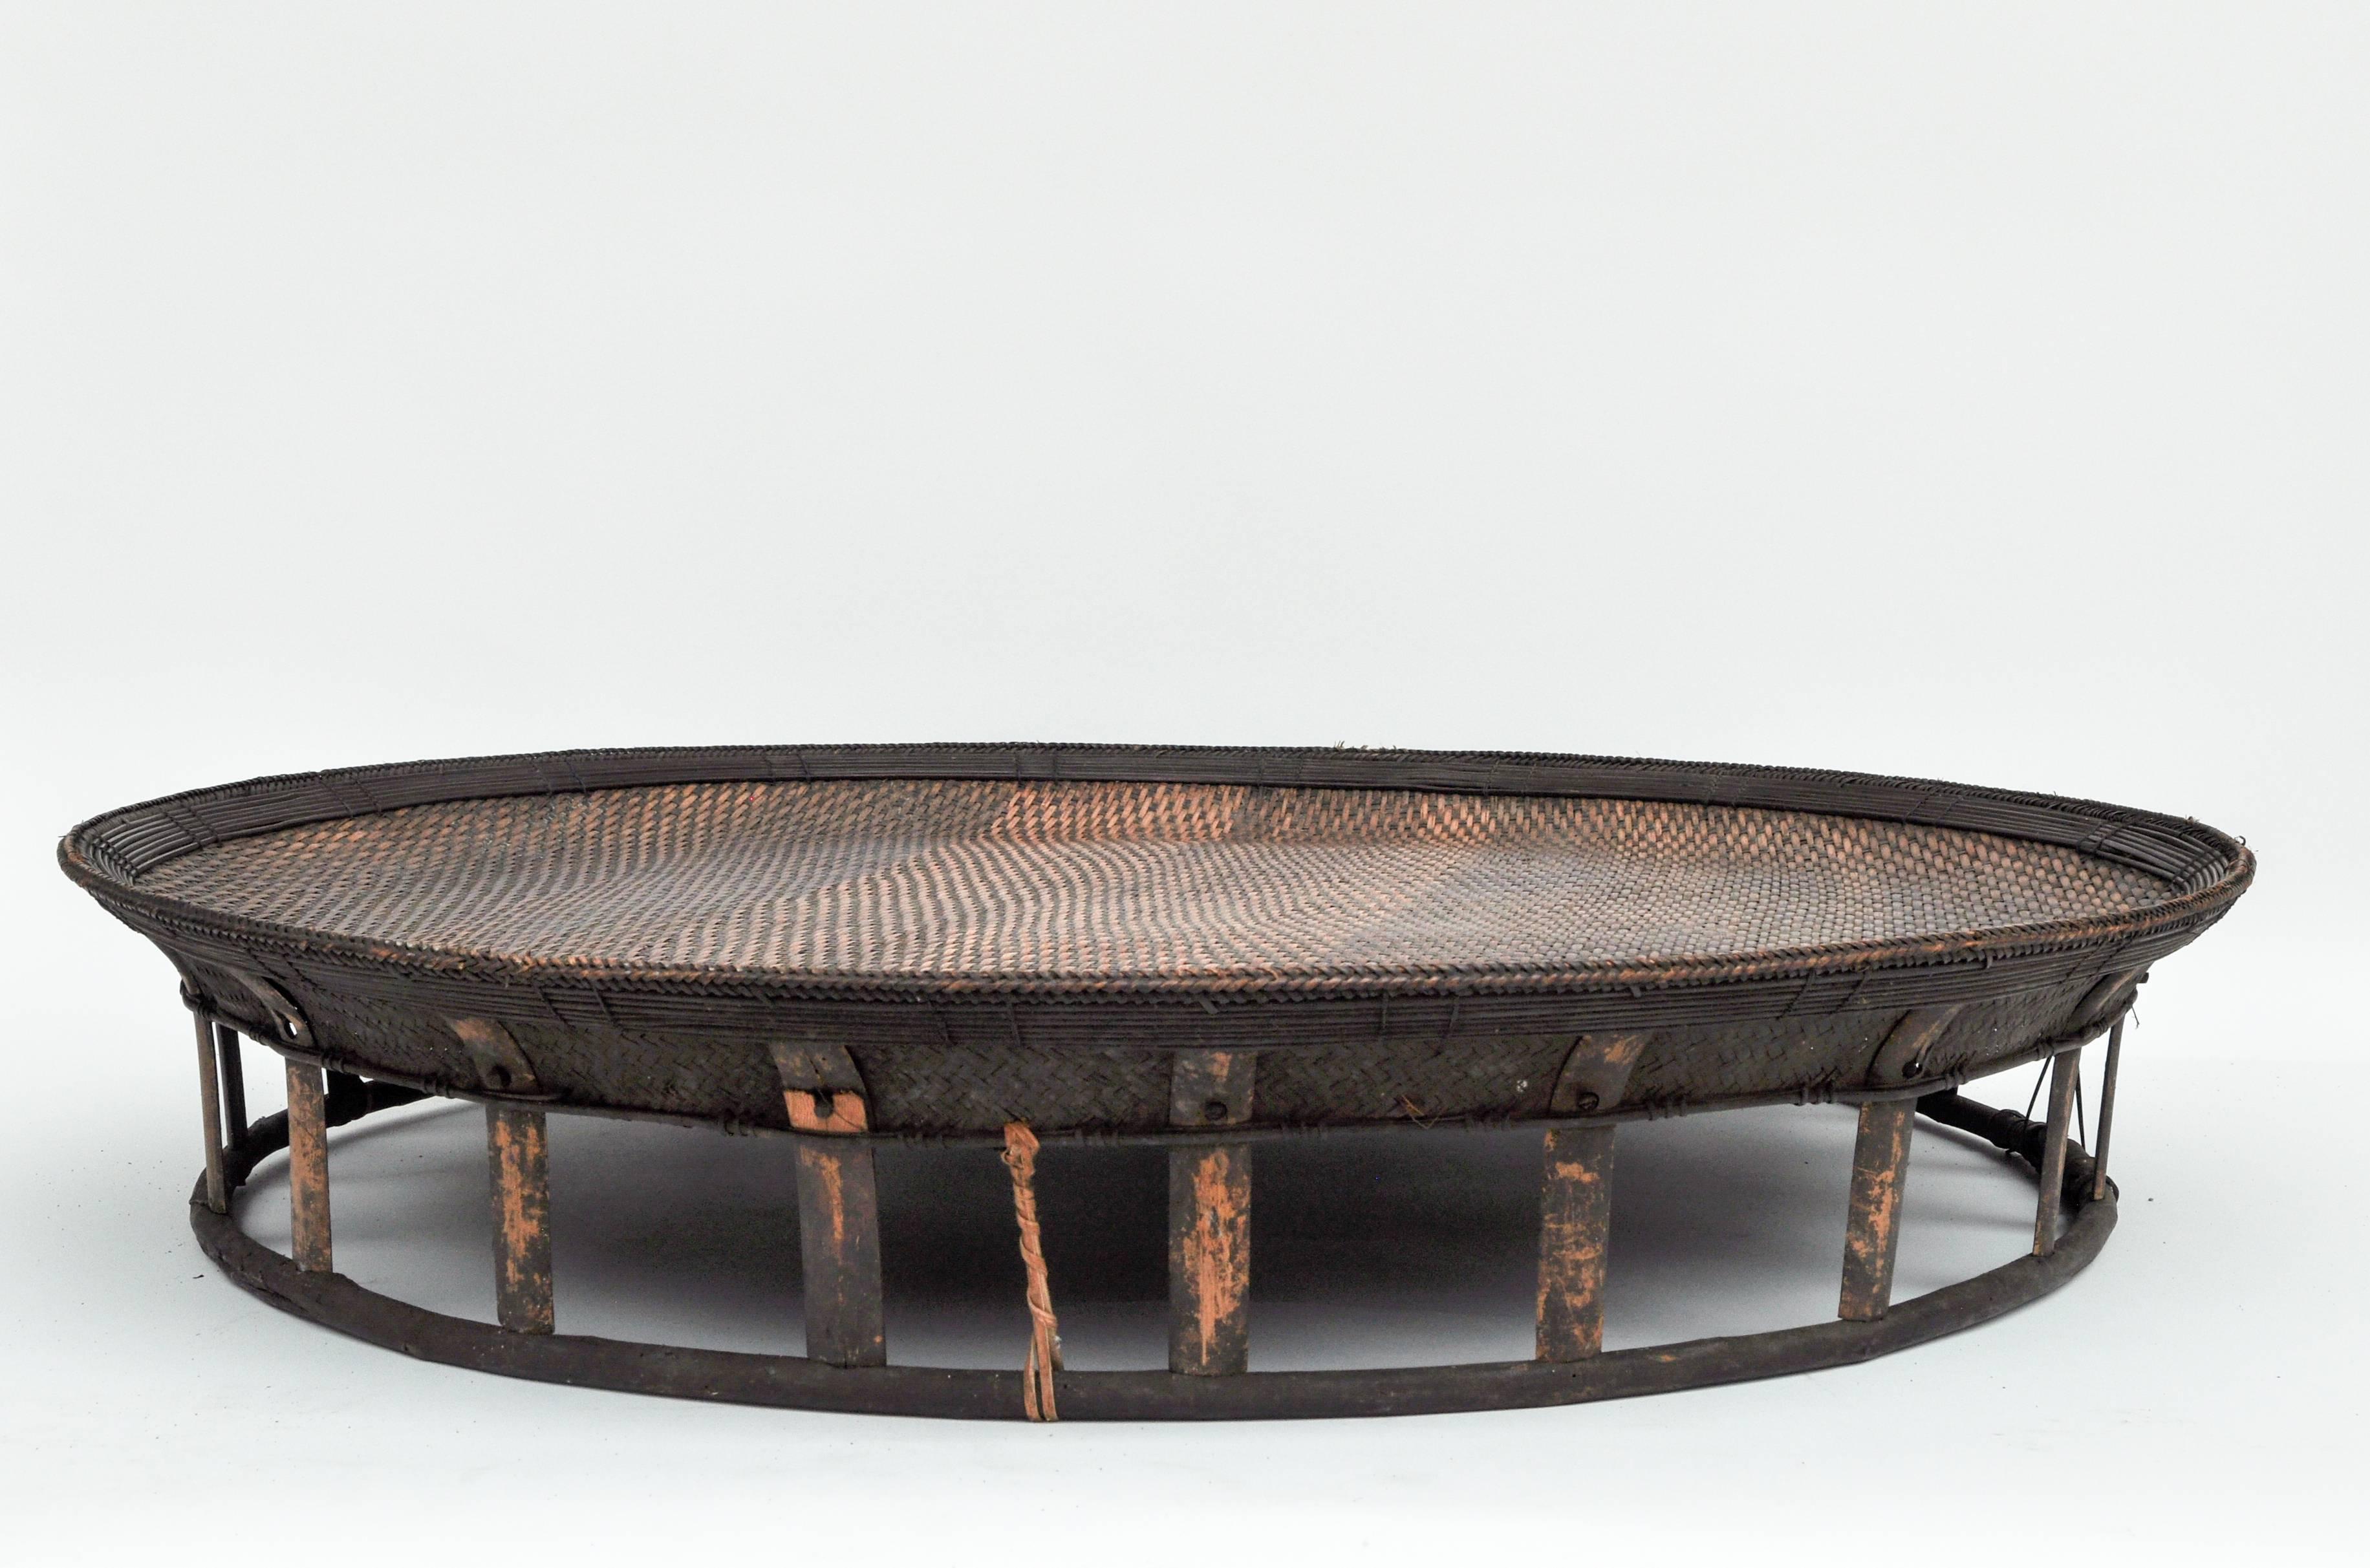 Large bamboo and rattan basket table or tray, Laos, mid-late-20th century.
Offered by Bruce Hughes.
This large rattan and bamboo piece served as a table in a Lao rural family home. 
Dimensions: 30 inches diameter by 6 inches tall.
 